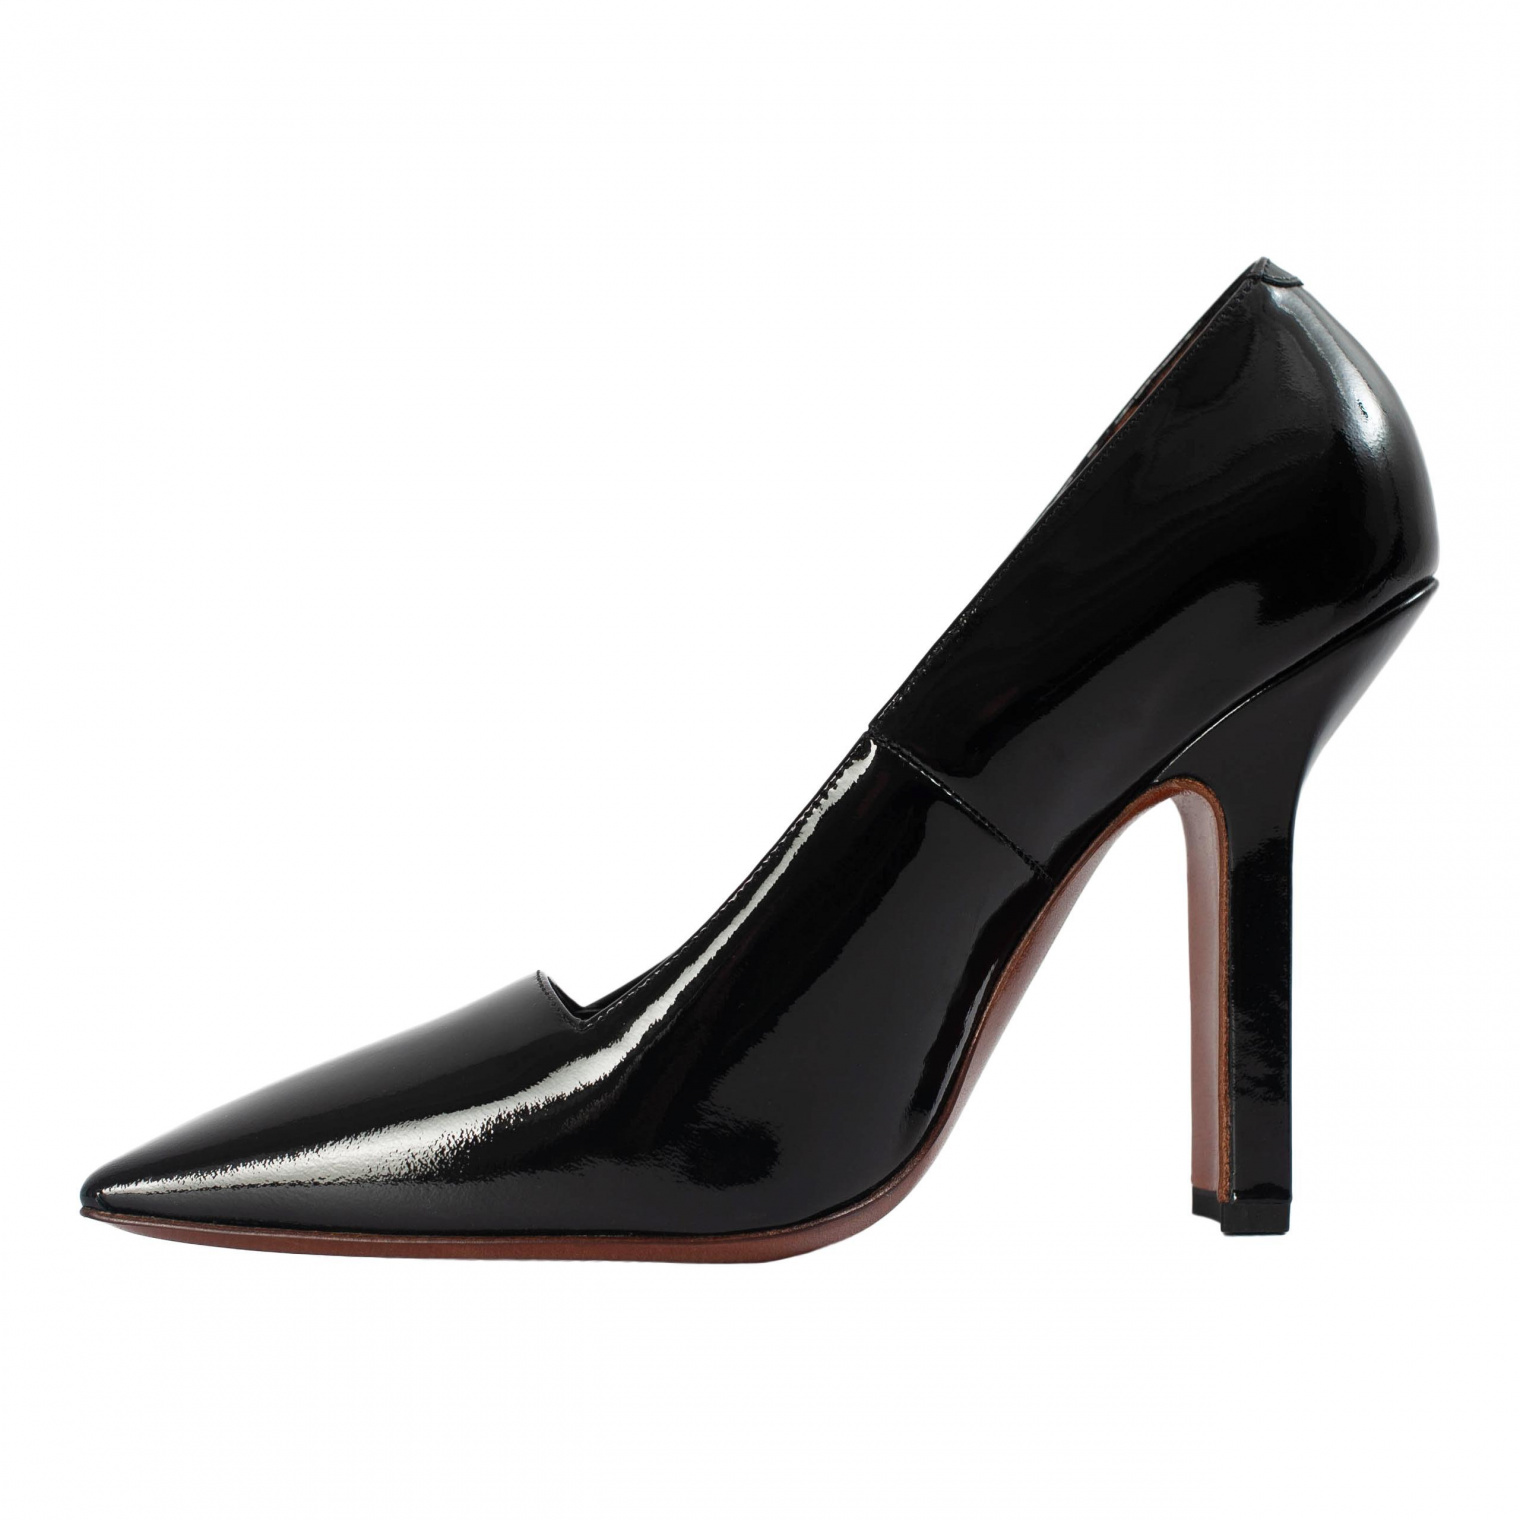 VETEMENTS Patent leather pumps with Logo